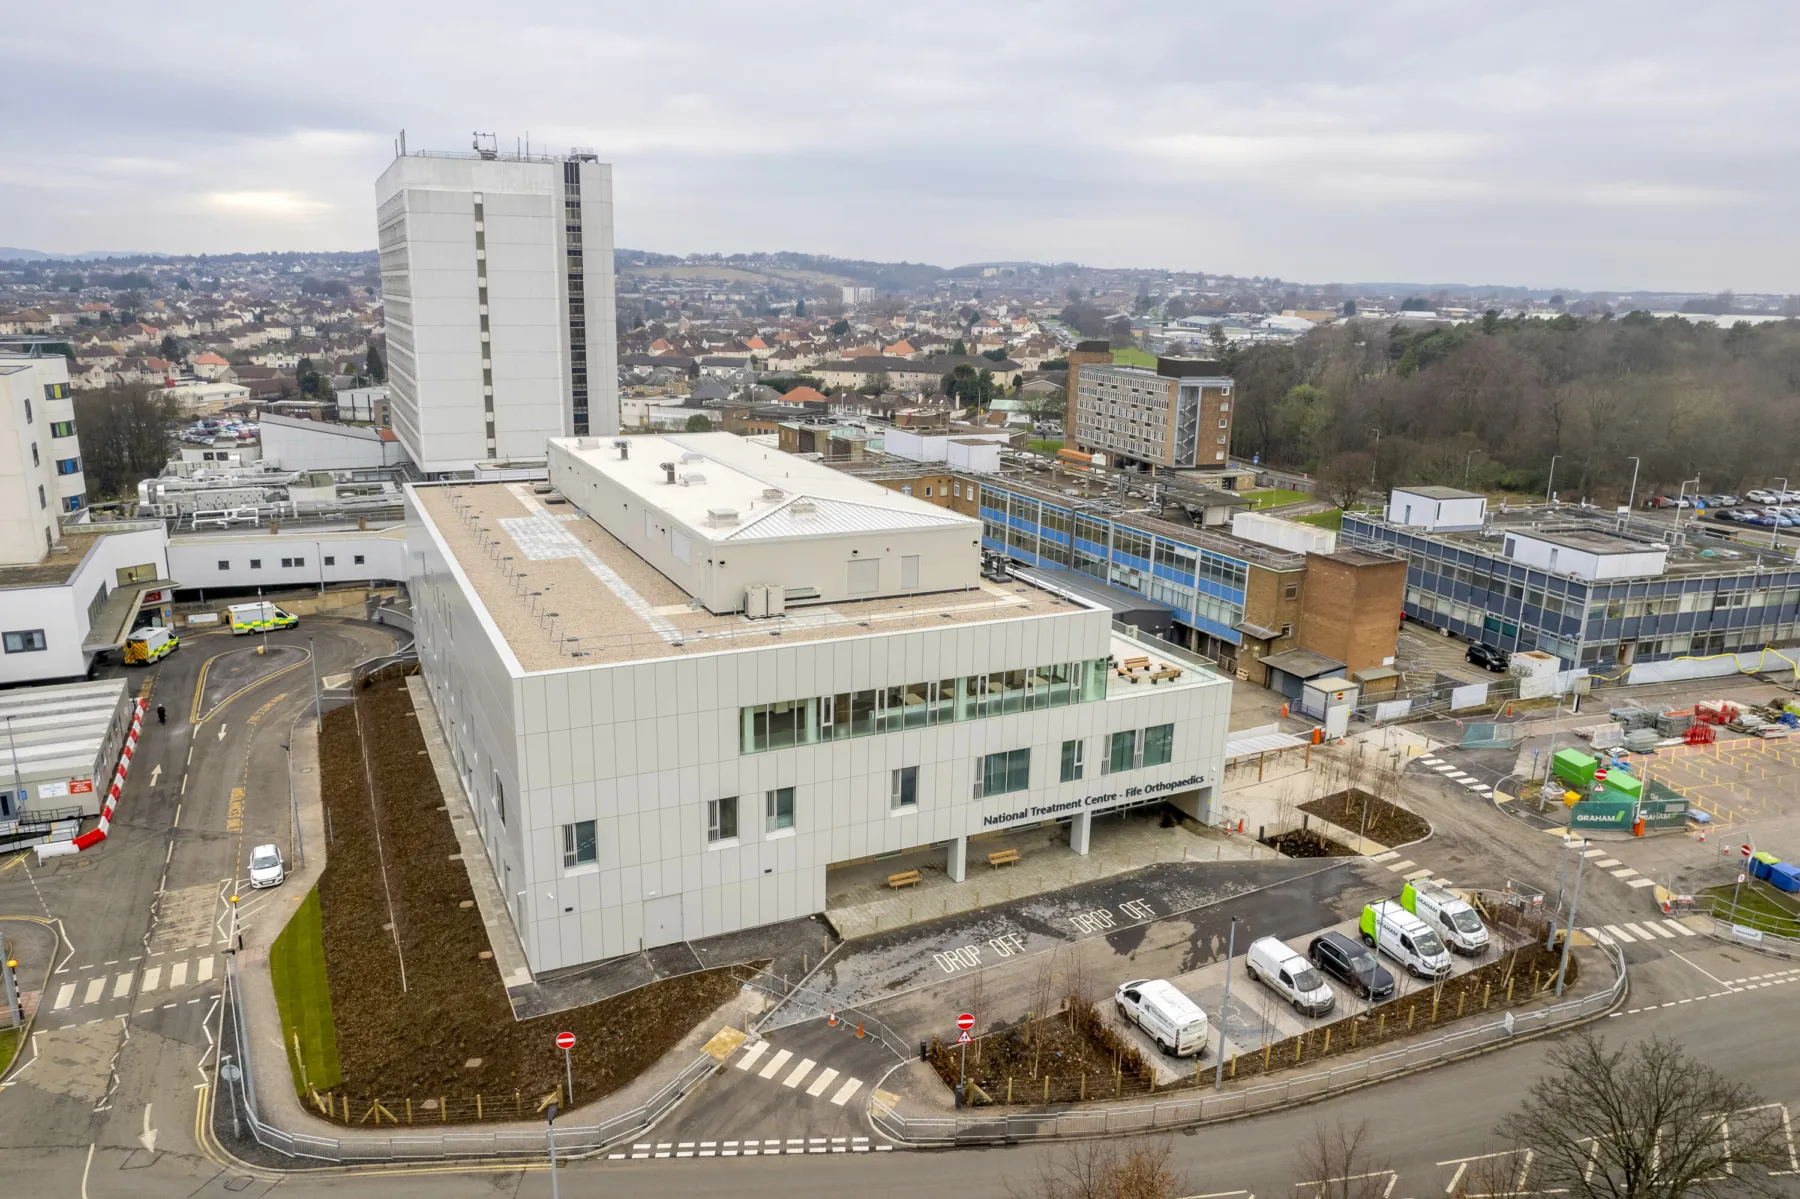 External, aerial view of the National Treatment Centre - Fife Orthopaedics. The building is part of the Kirkcaldy Victoria Hospital campus. The building is white-clad and has three storeys.